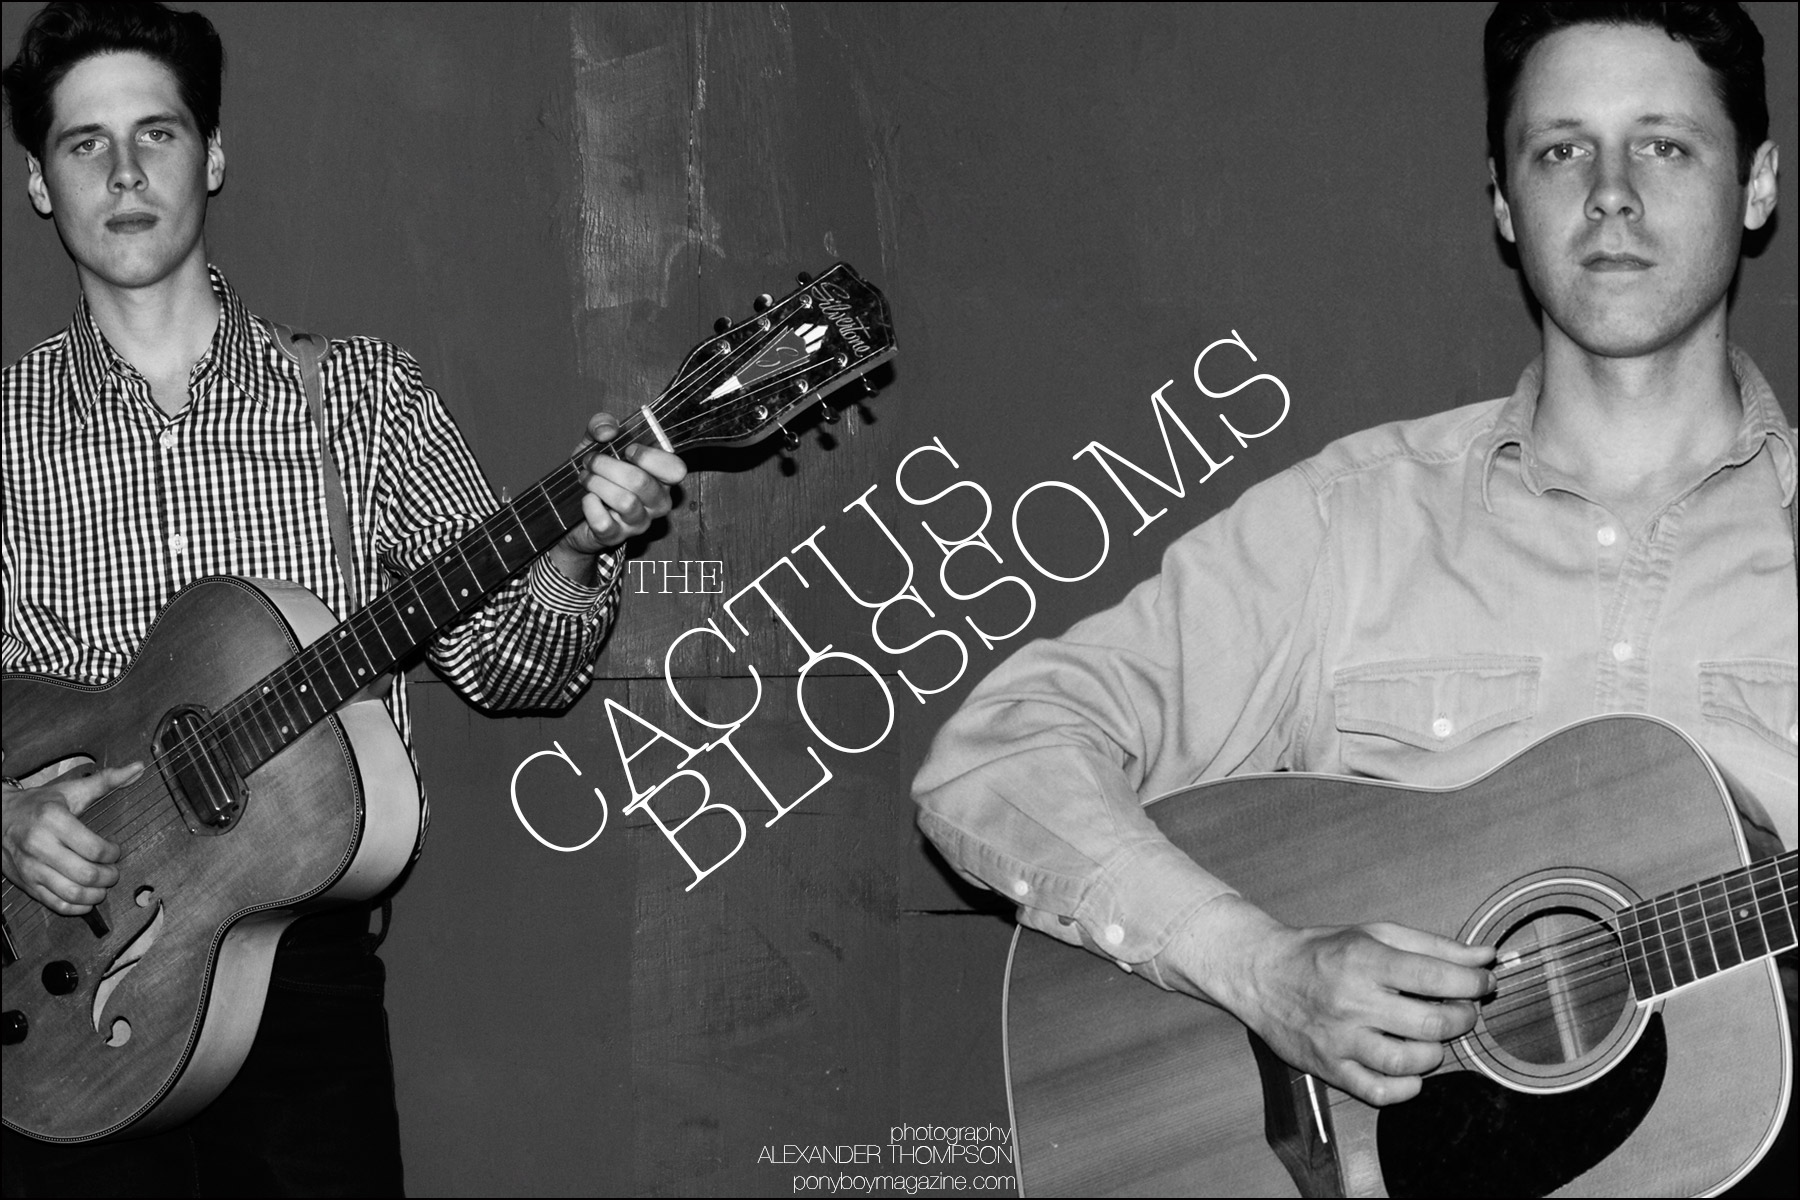 The Cactus Blossoms photographed by Alexander Thompson for Ponyboy magazine.